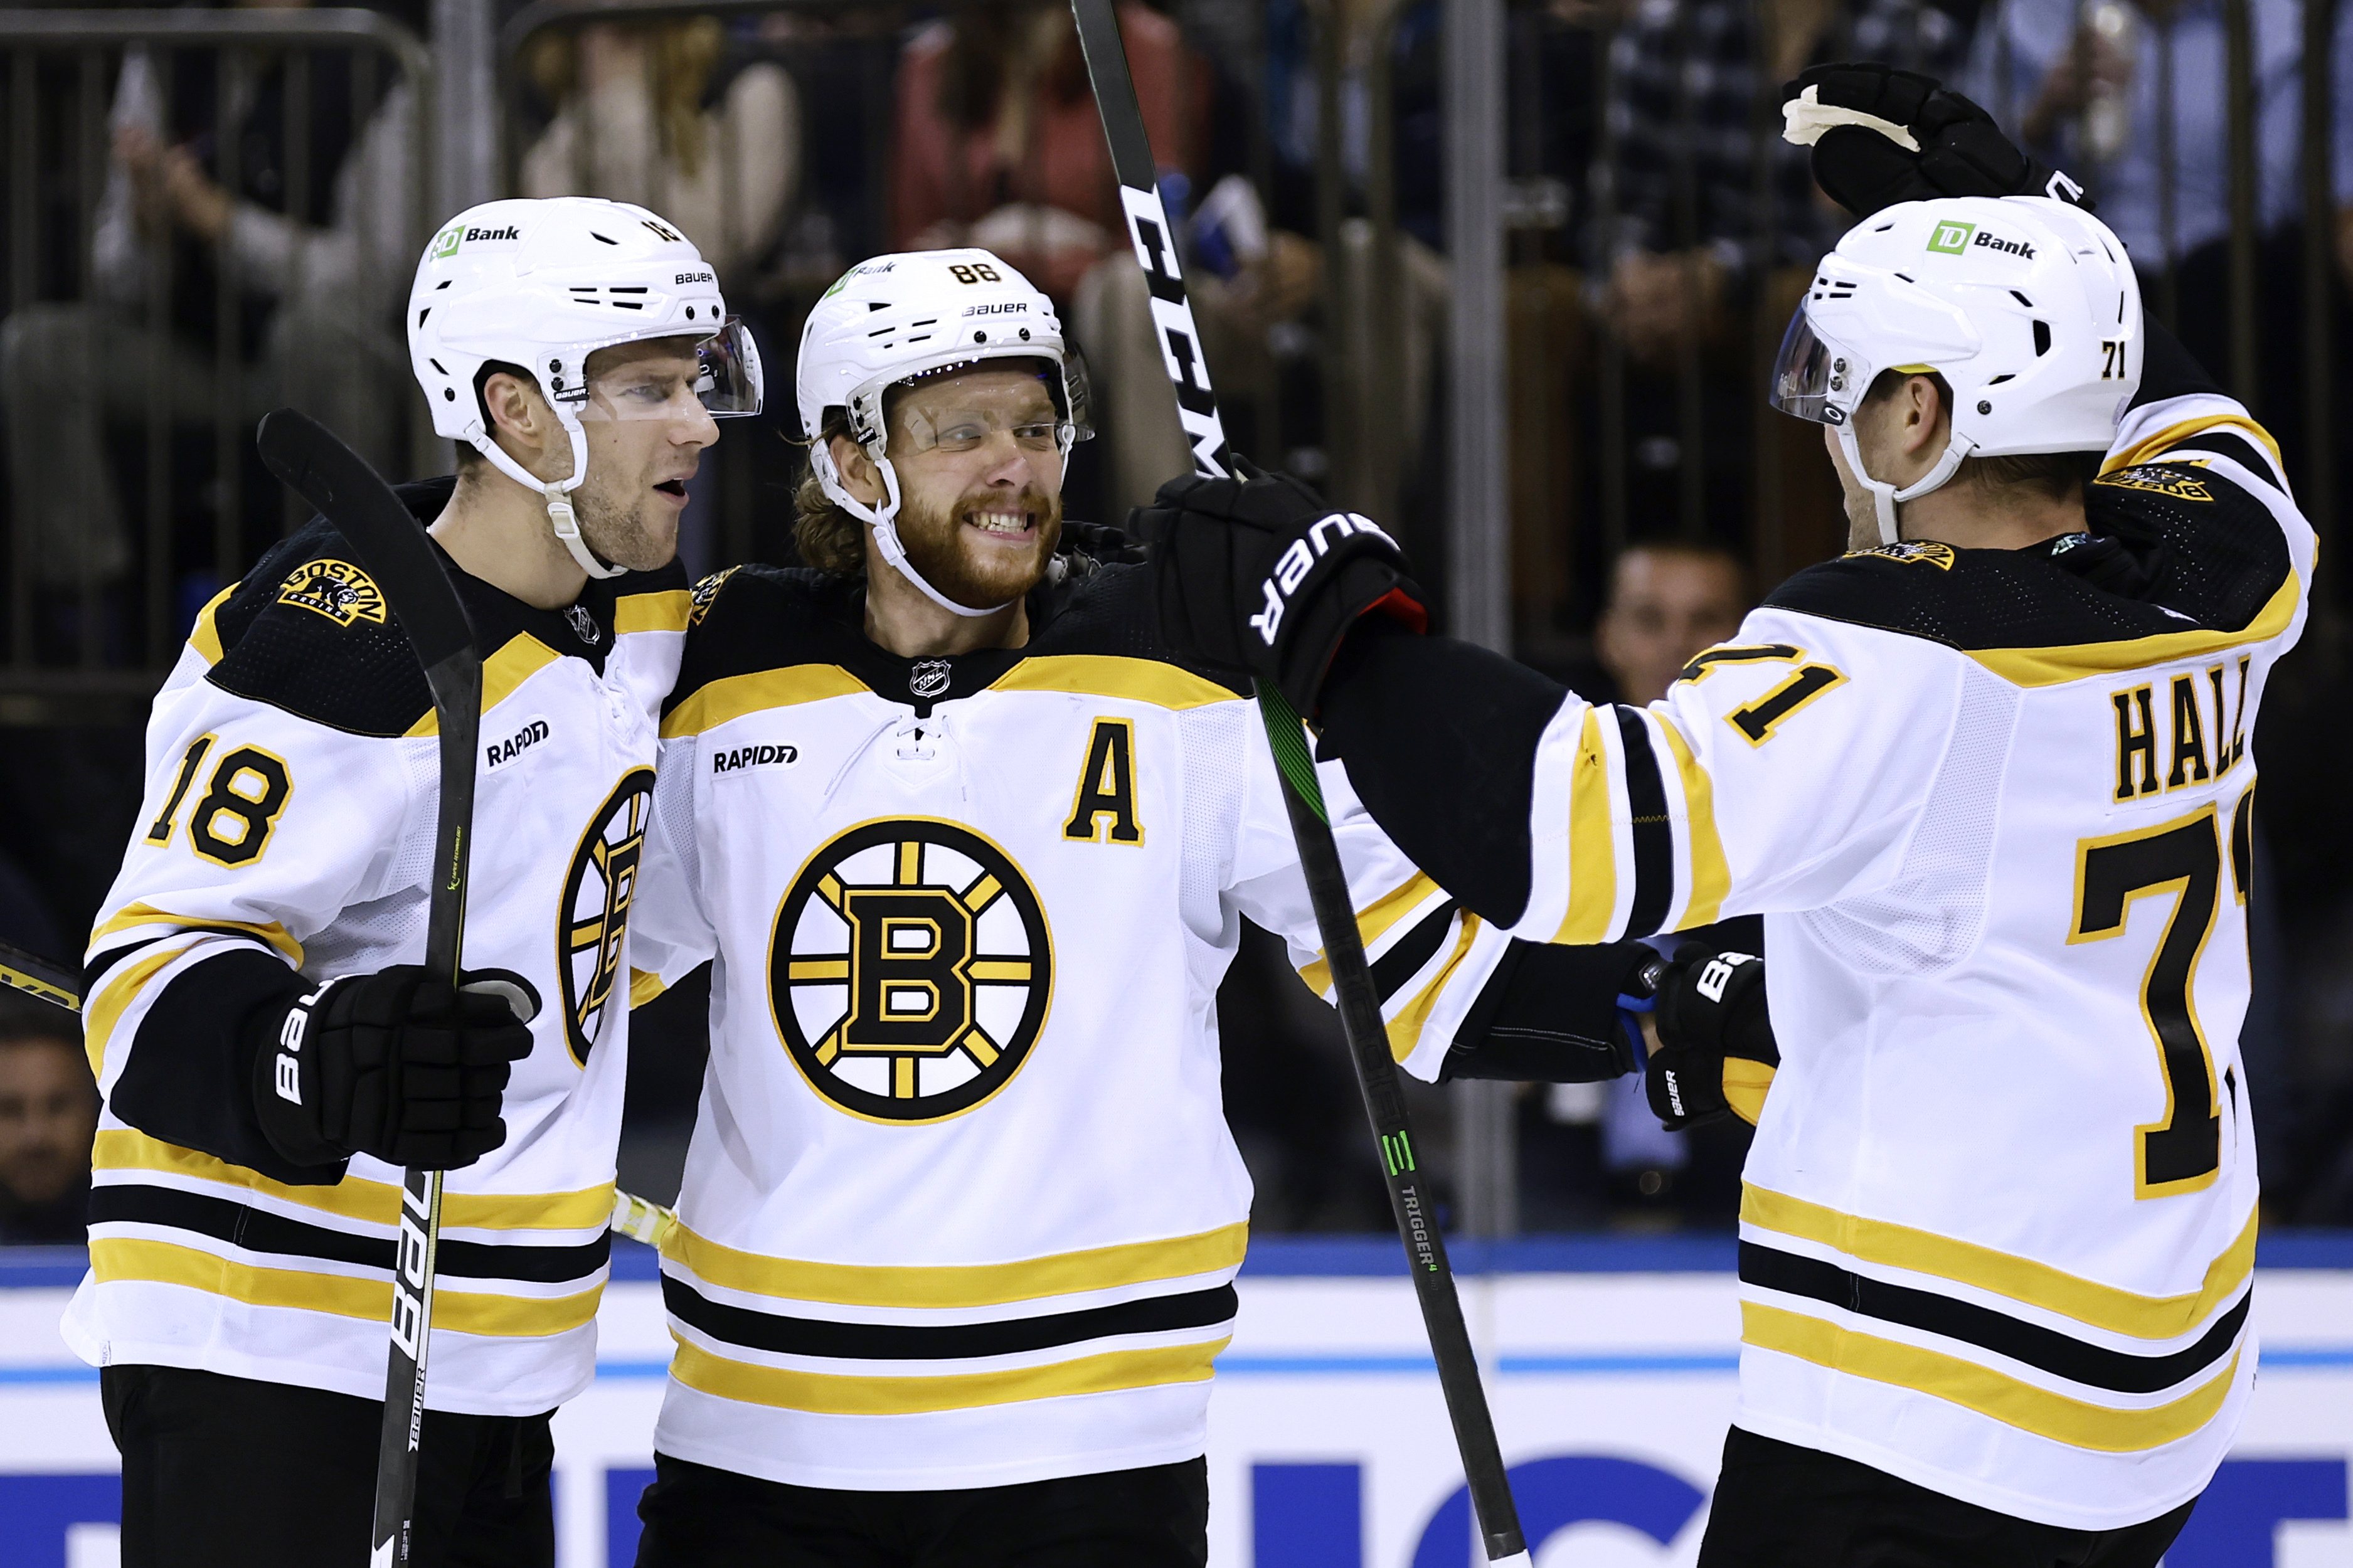 Rangers stay hot against a favorite opponent, the Bruins